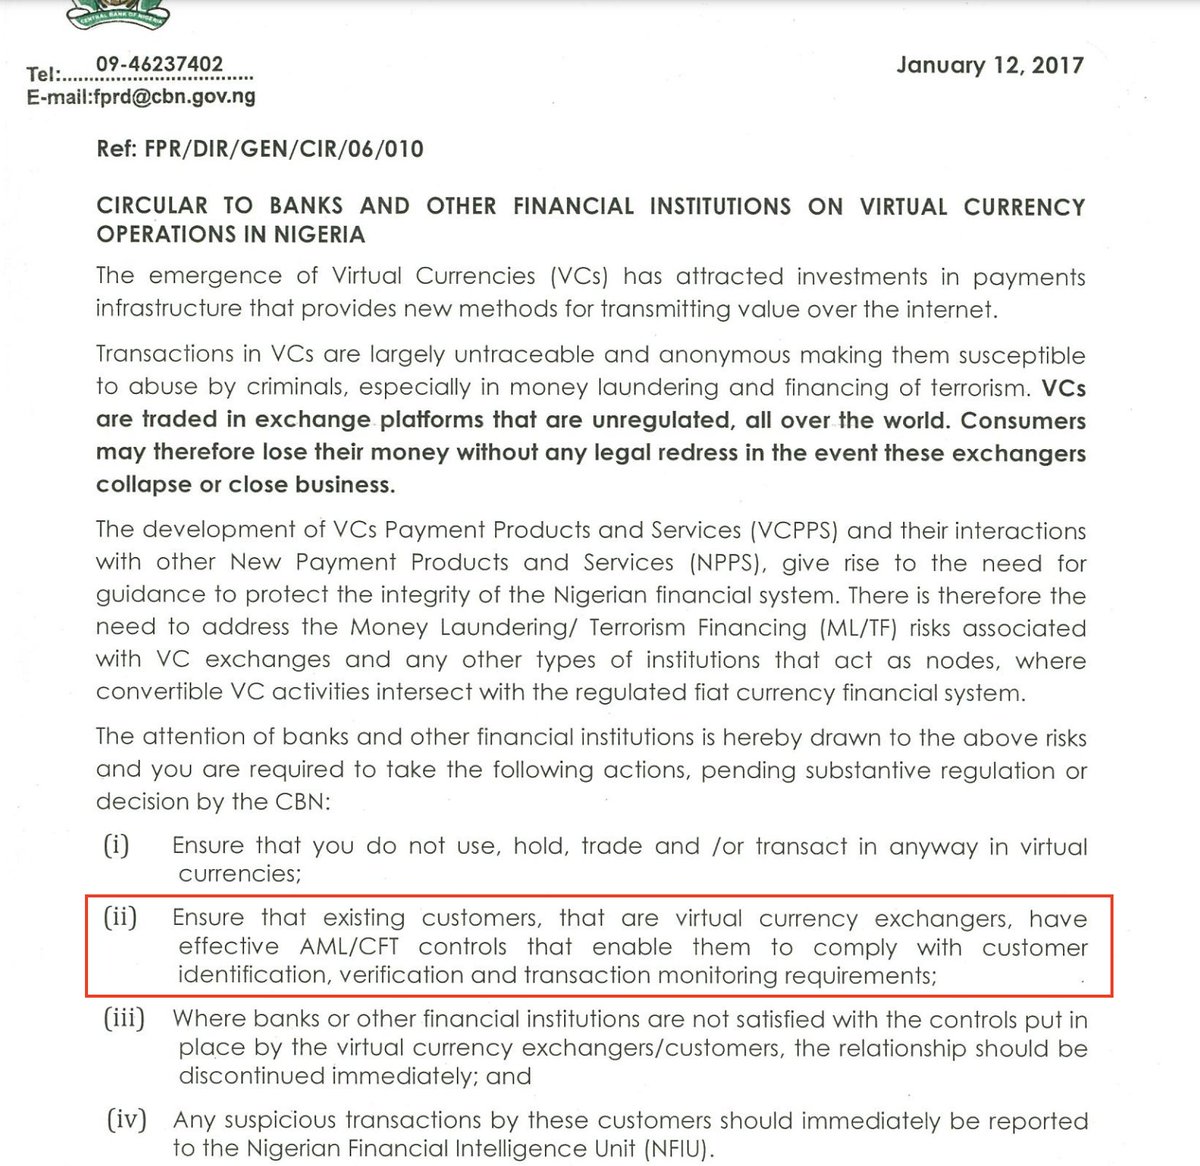 That is a lie! The 2017 circular forbade banks from holding, trading or transacting in cryptocurrencies. However, it gave them the permission to have merchants who are crypto exchanges, provided they meet Anti-Money Laundering and Counter-Terrorism Financing requirements.